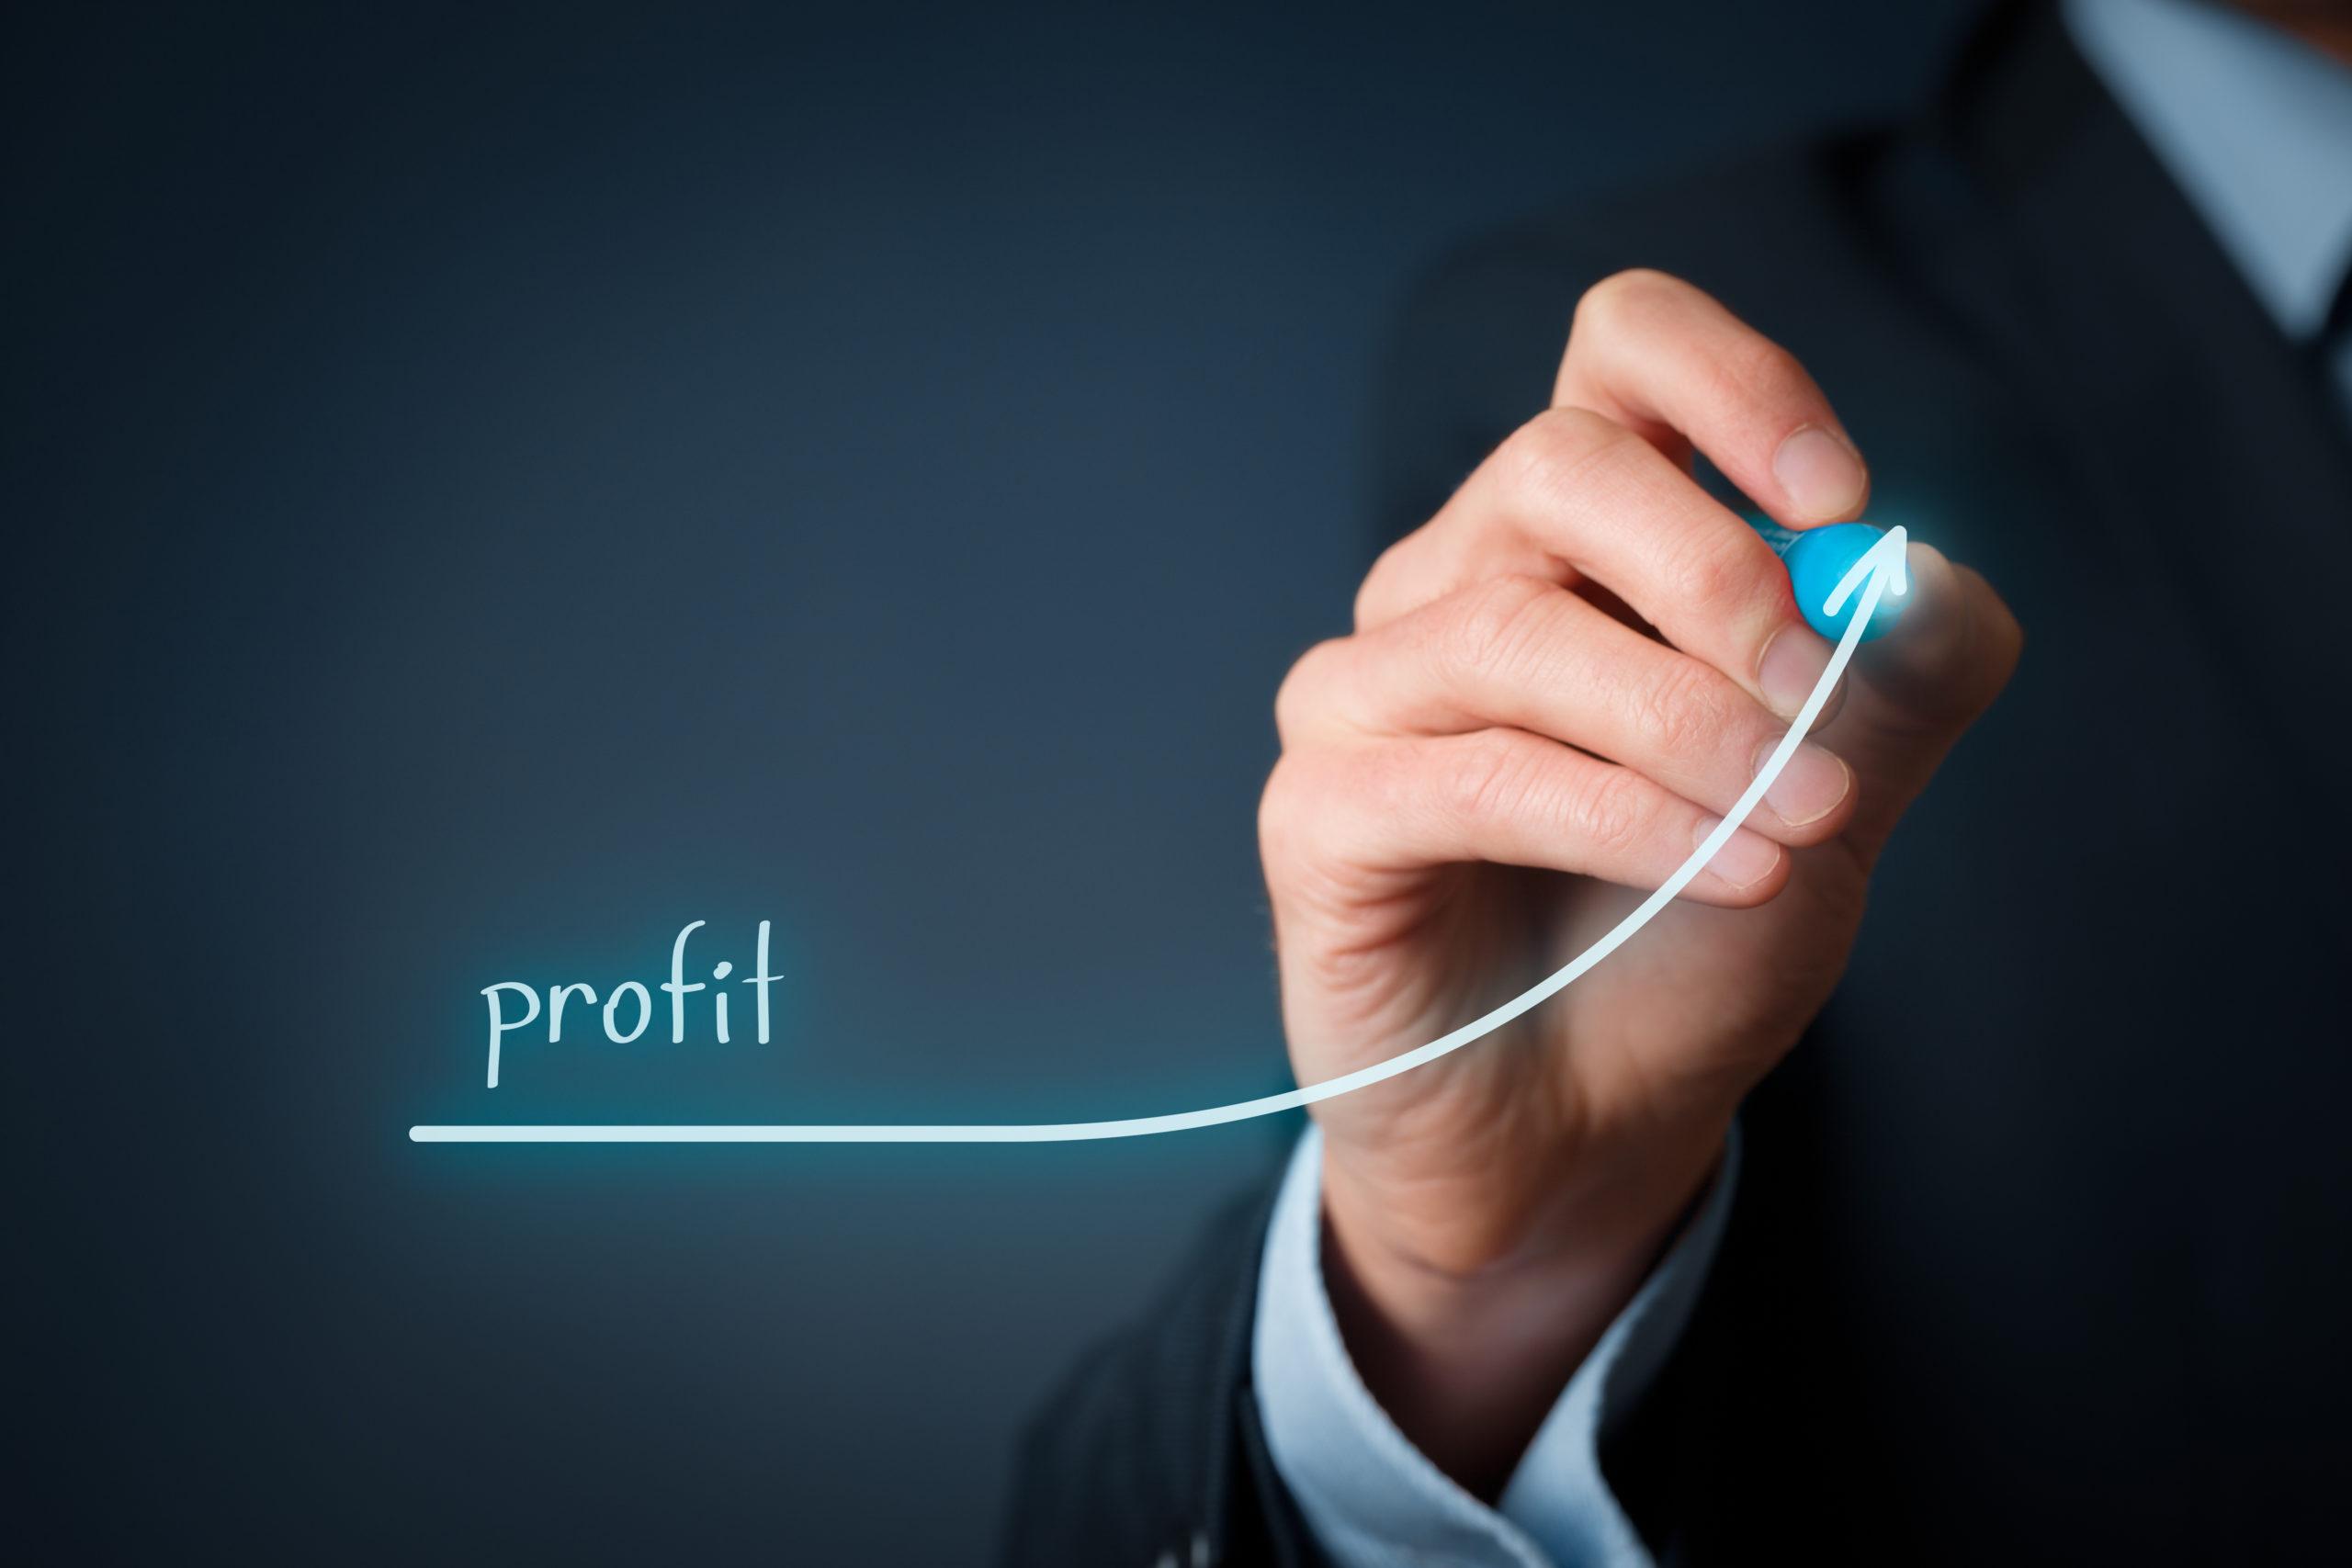 Profit is not a dirty word